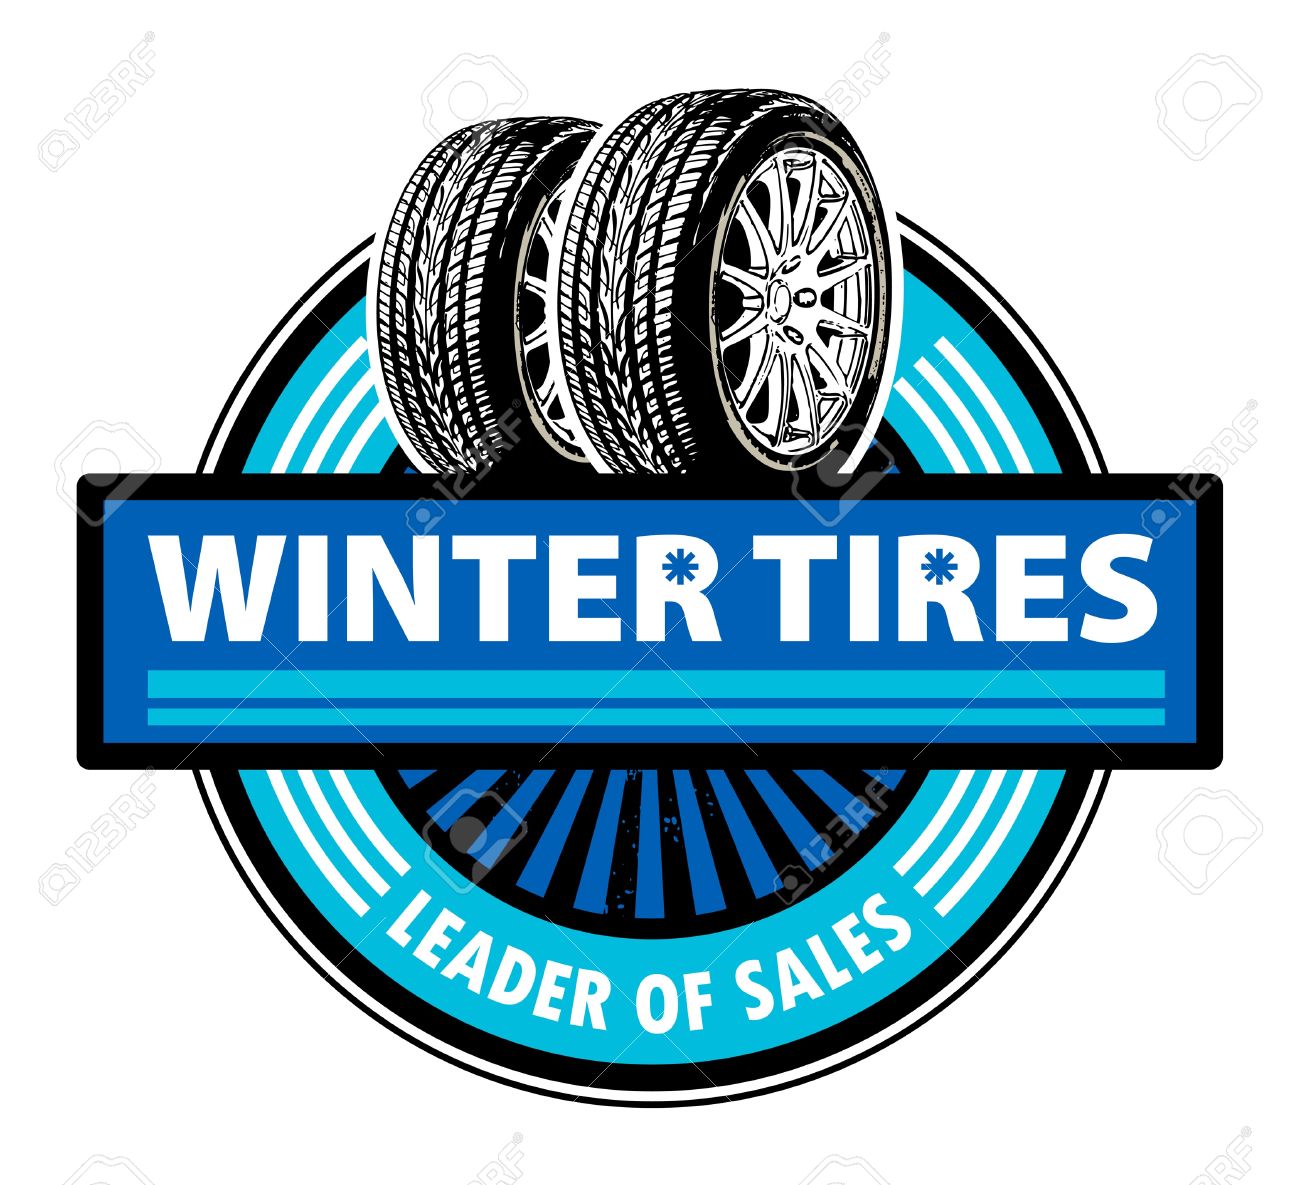 Sticker With The Tires And Word Winter Tires Written Inside.